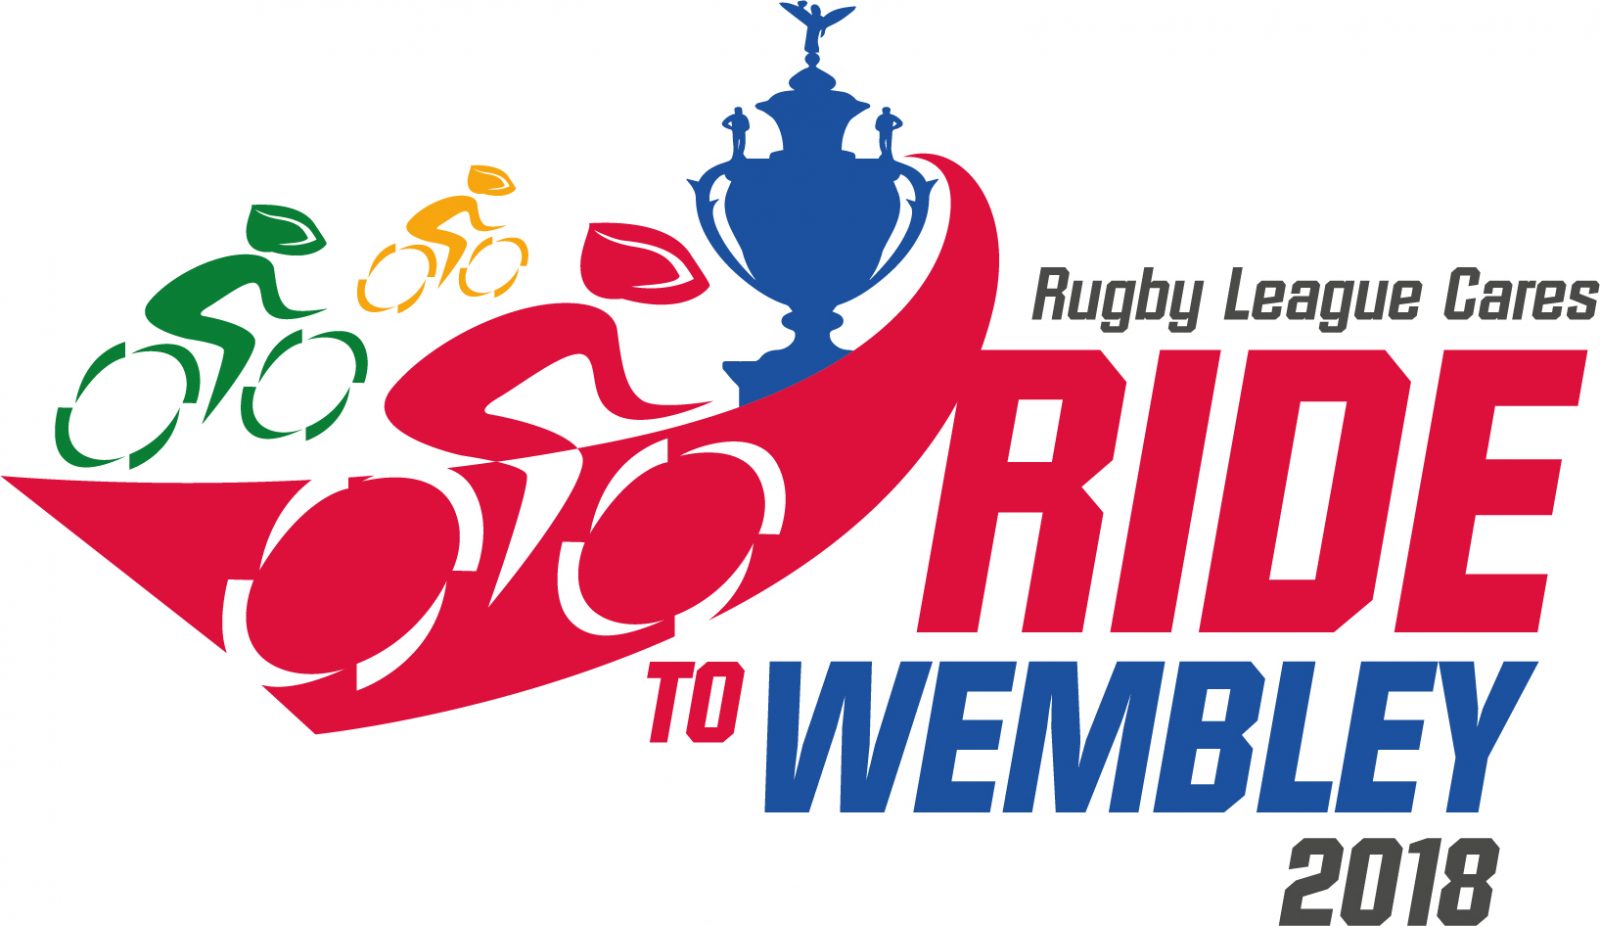 Who’s who on the 2018 UK Red Ride to Wembley